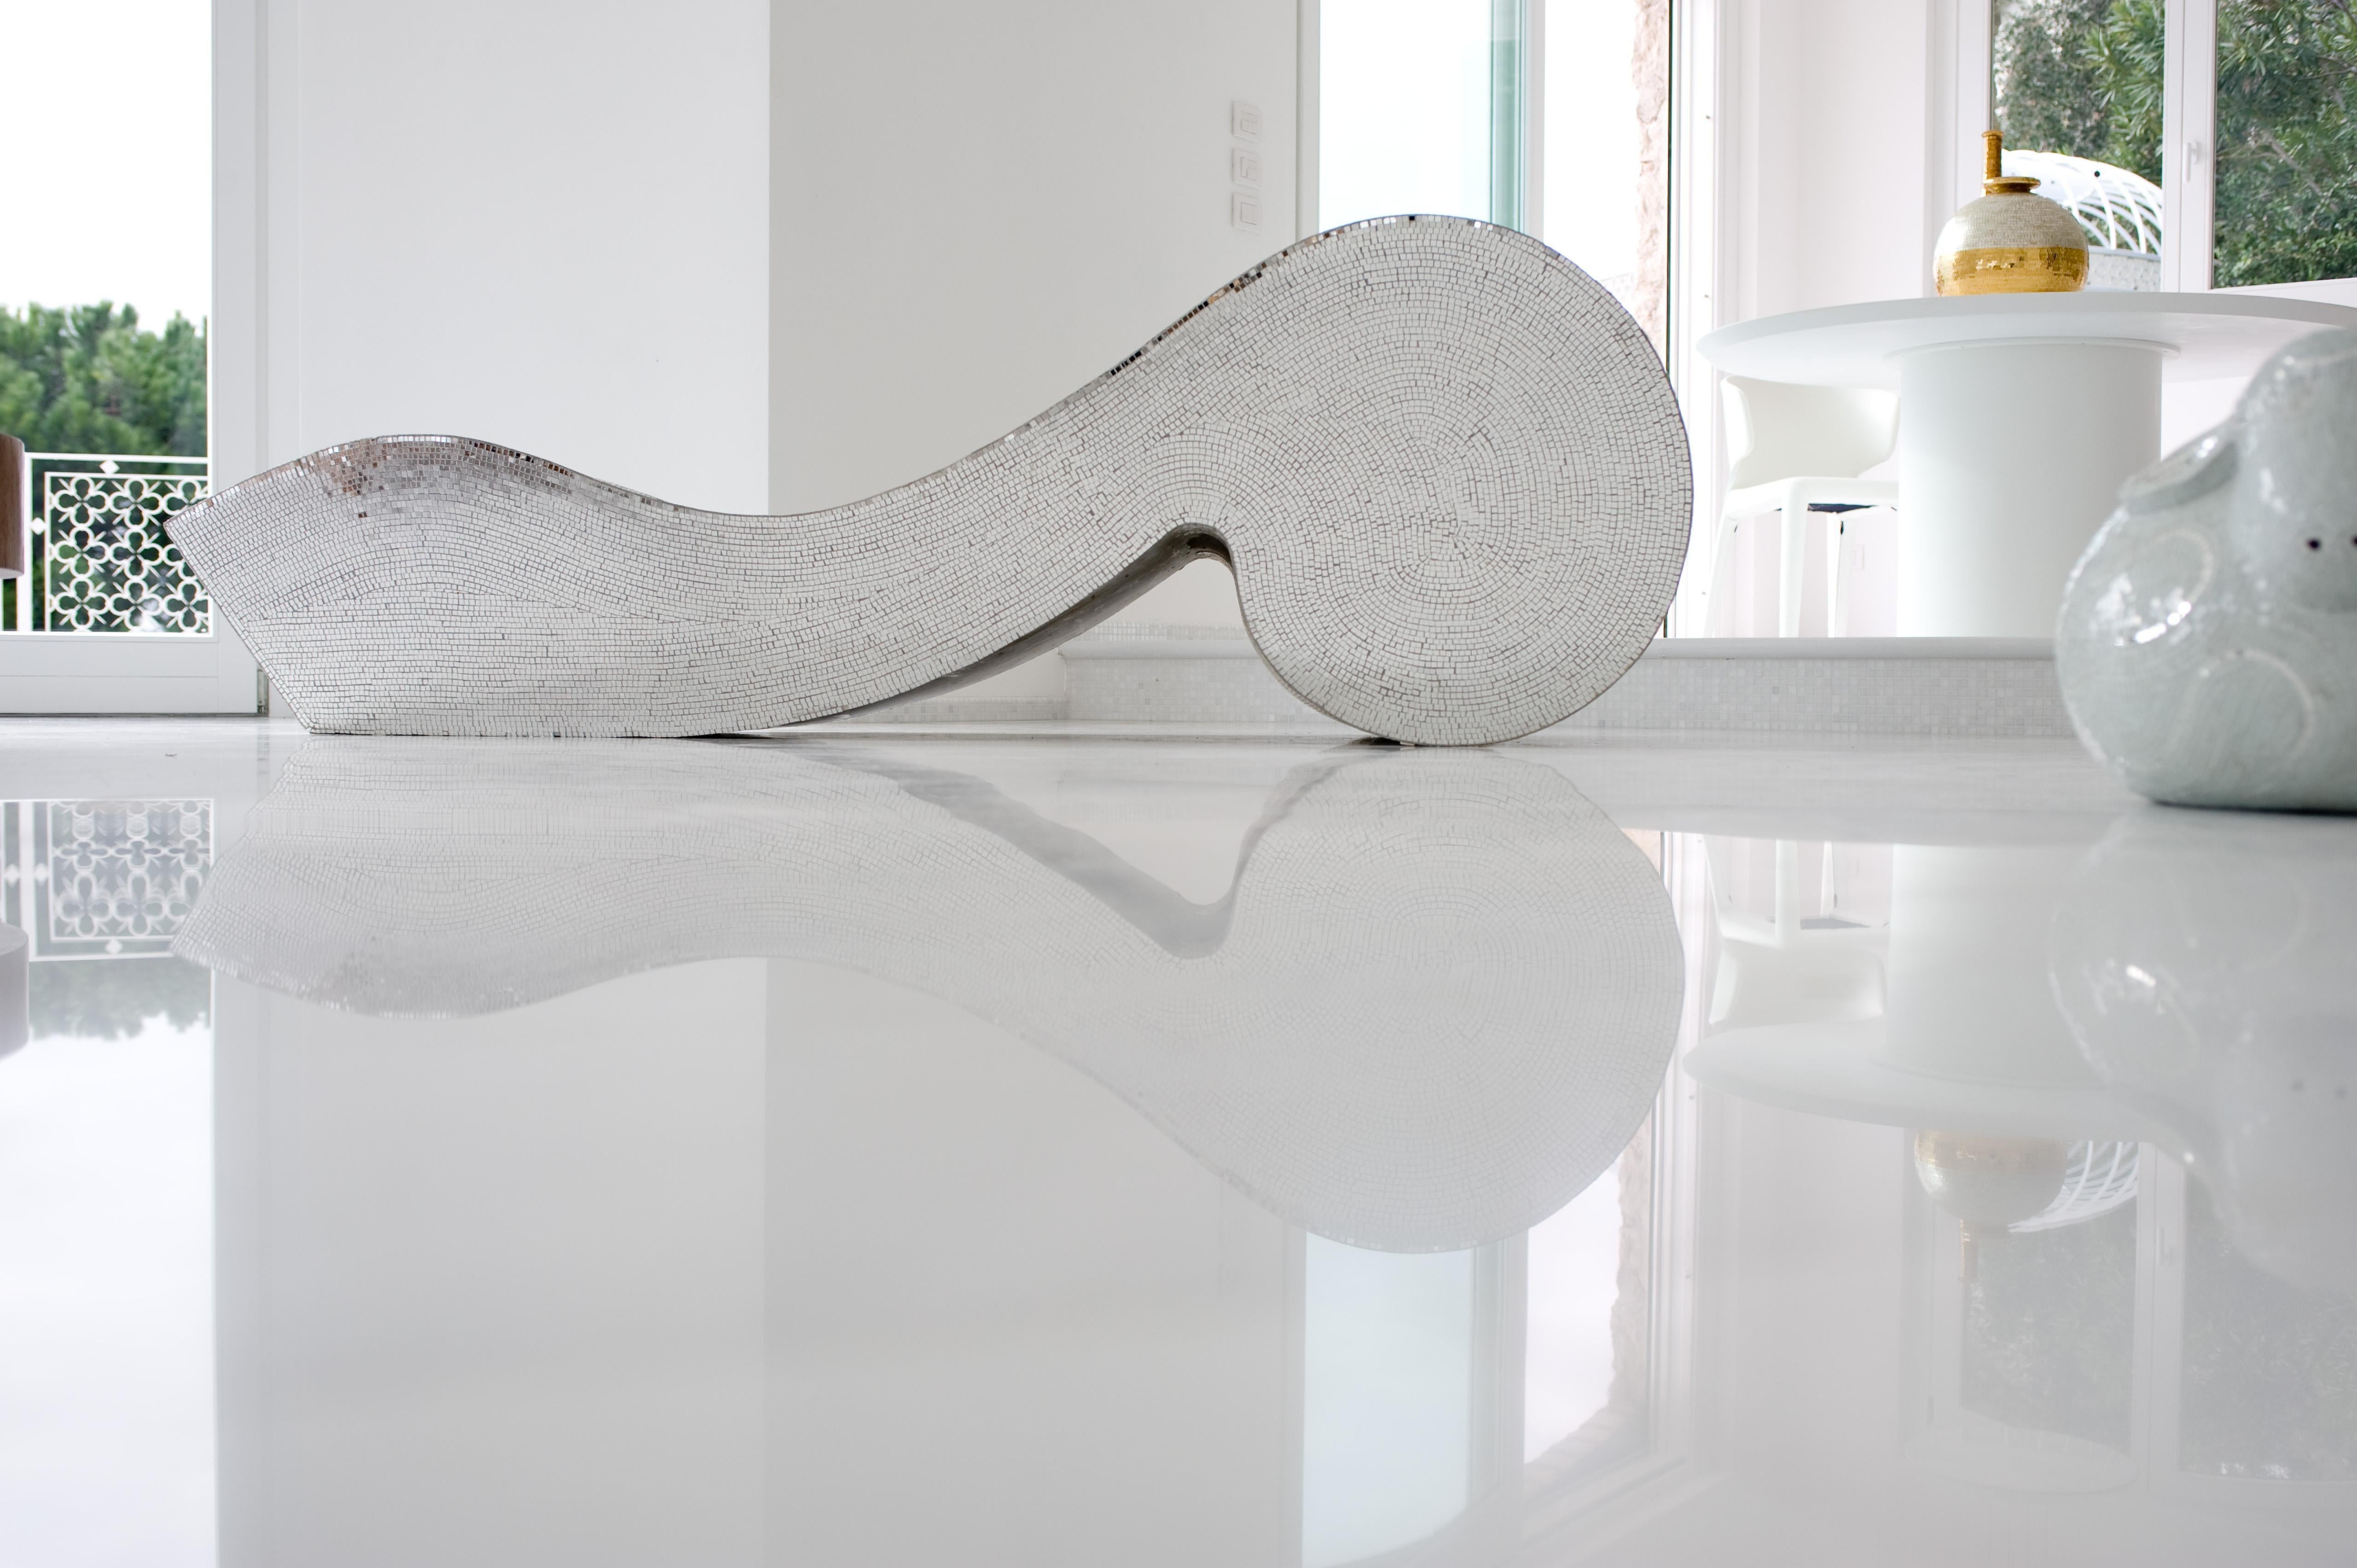 A show-stopper sure to catalyze attention in any indoor or outdoor context, this glamorous piece can simultaneously be a chaise-longue or a glistening mosaic sculpture. Its sinuous core in polyethylene is fully covered with square mirrored glass